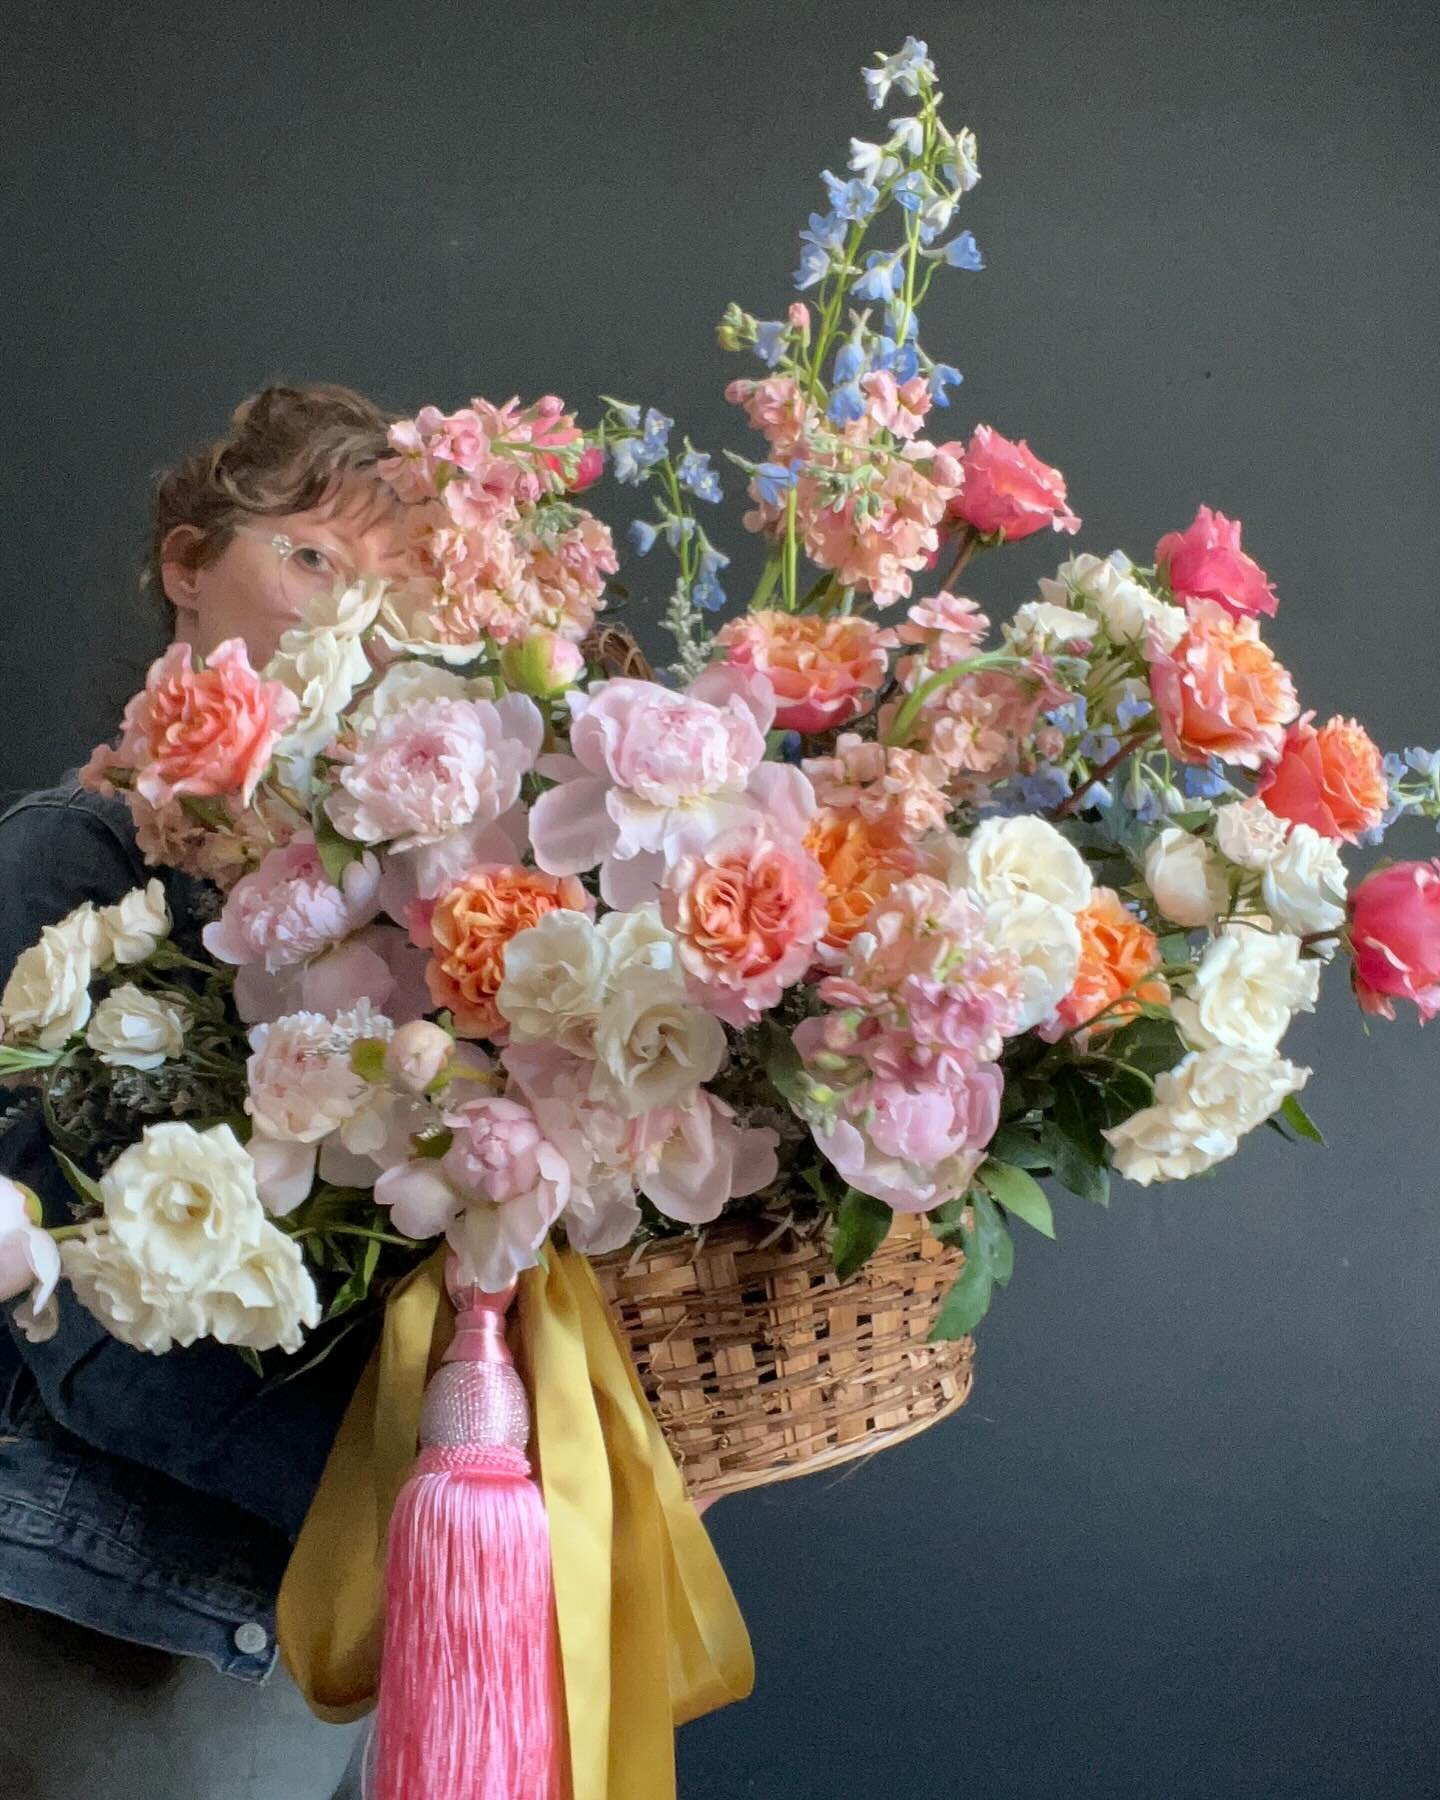 Do you love your mum this much? Taking custom Mothers Day order now! Let&rsquo;s create a one of a kind arrangement for a one of a kind mum. Call or message the studio 🌷

#therosethief #mothersday2024 #morhersdayflowers  #westernmassflorist #mothers